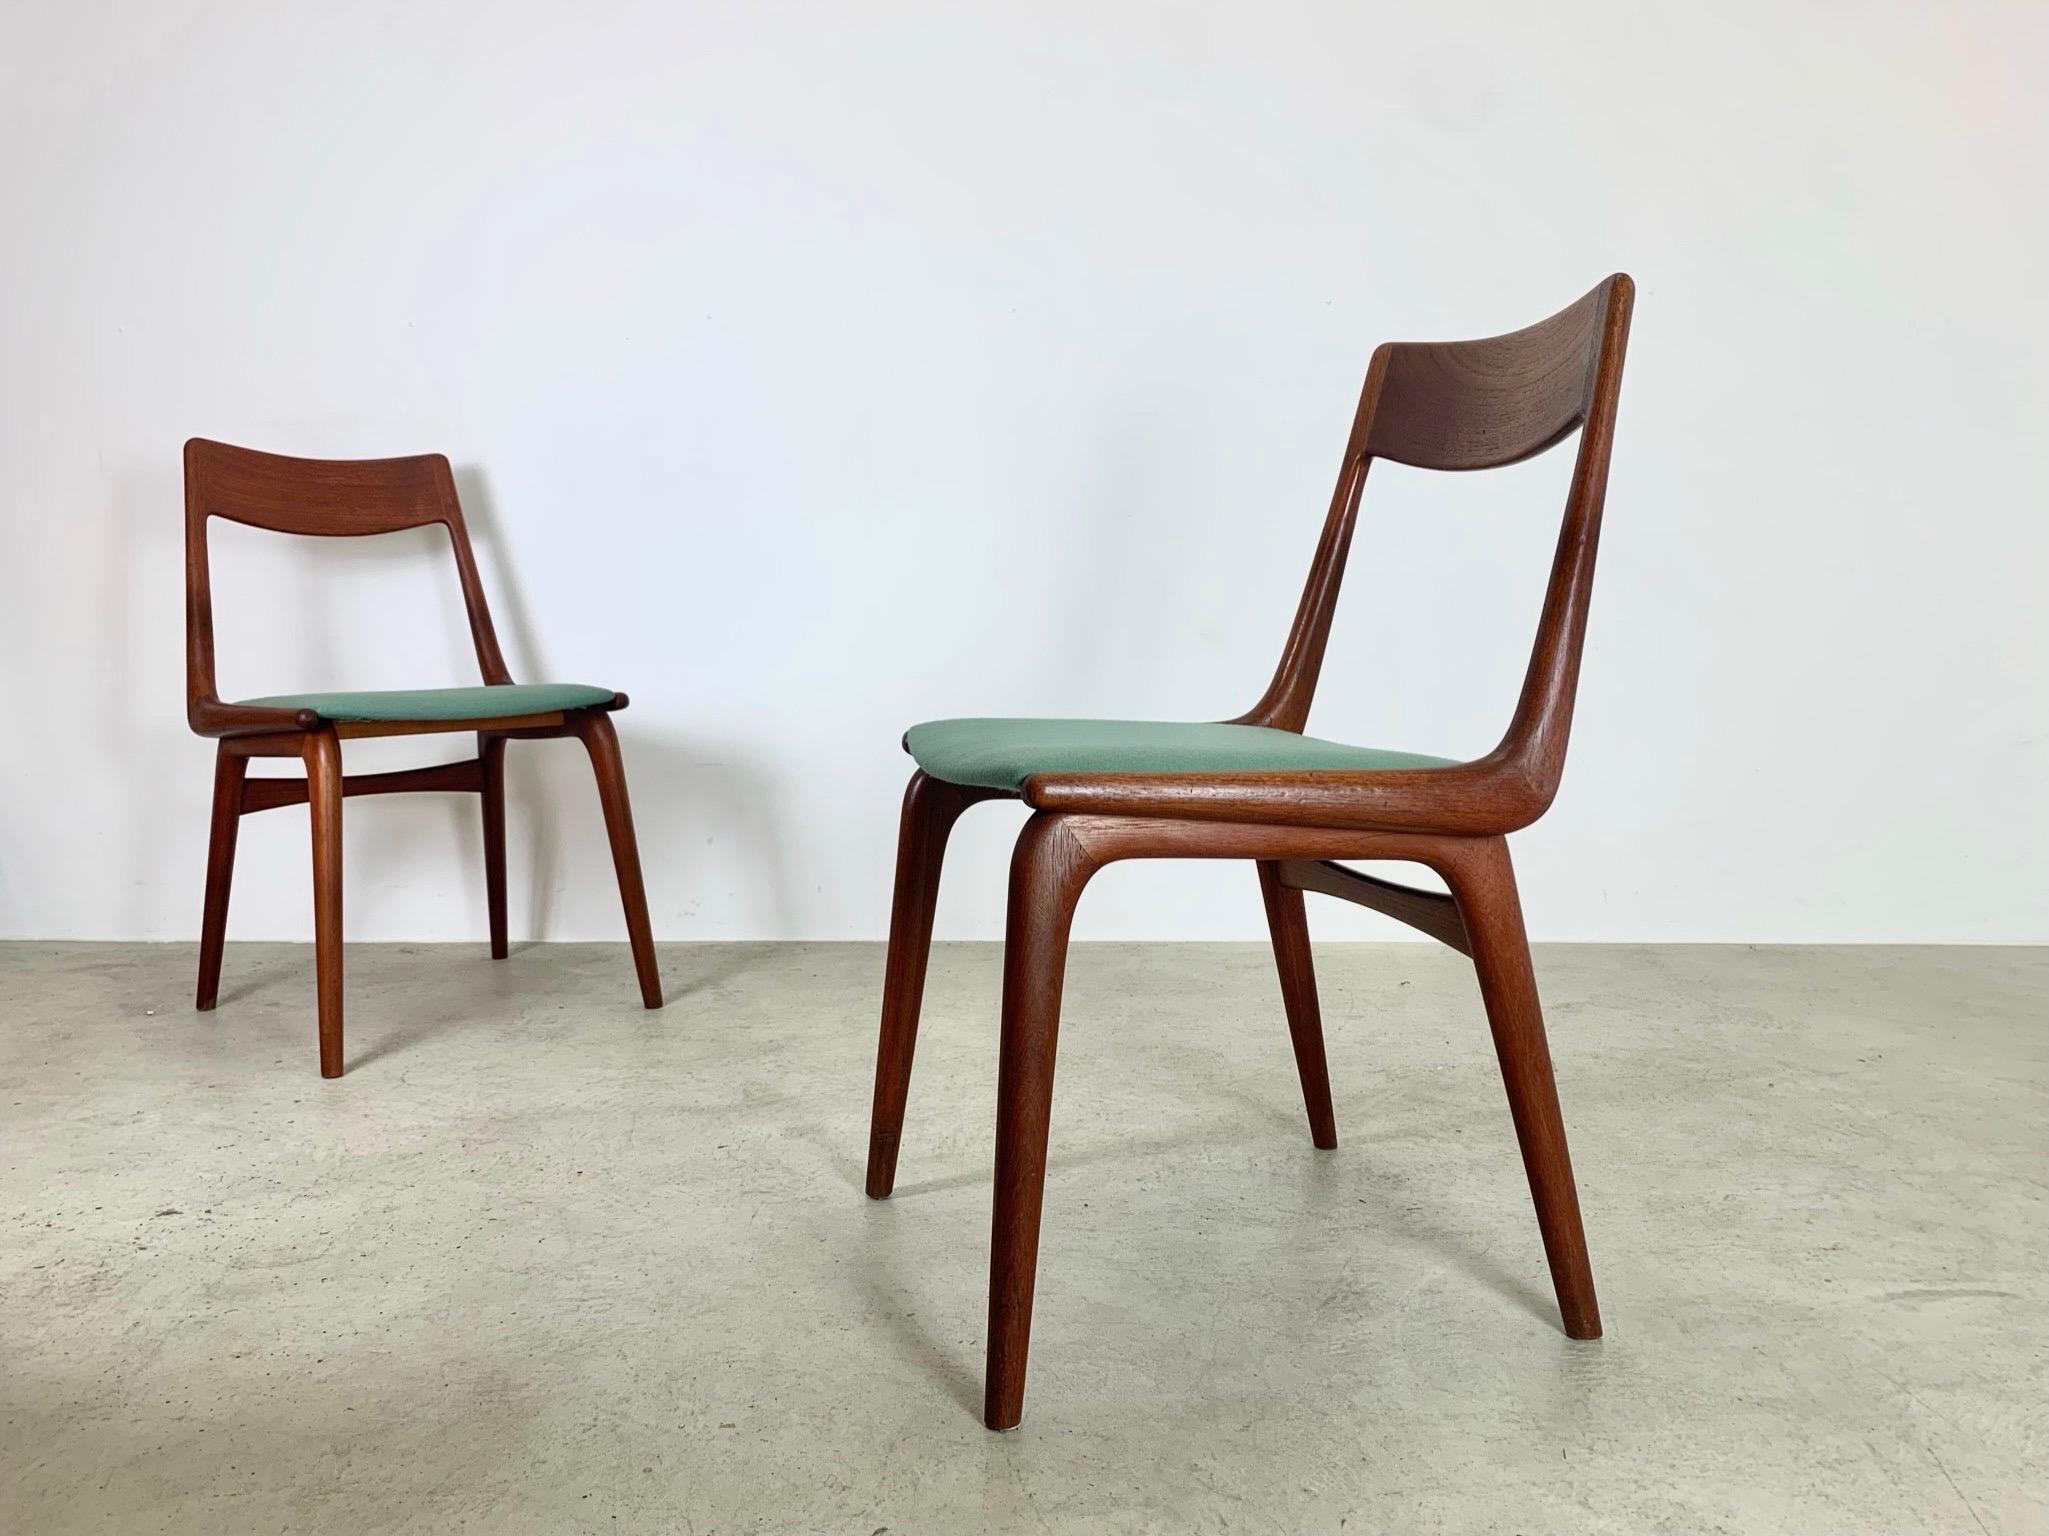 4x Danish Teak Boomerang Chairs by Alfred Christensen, 1950s restored In Good Condition For Sale In St-Brais, JU